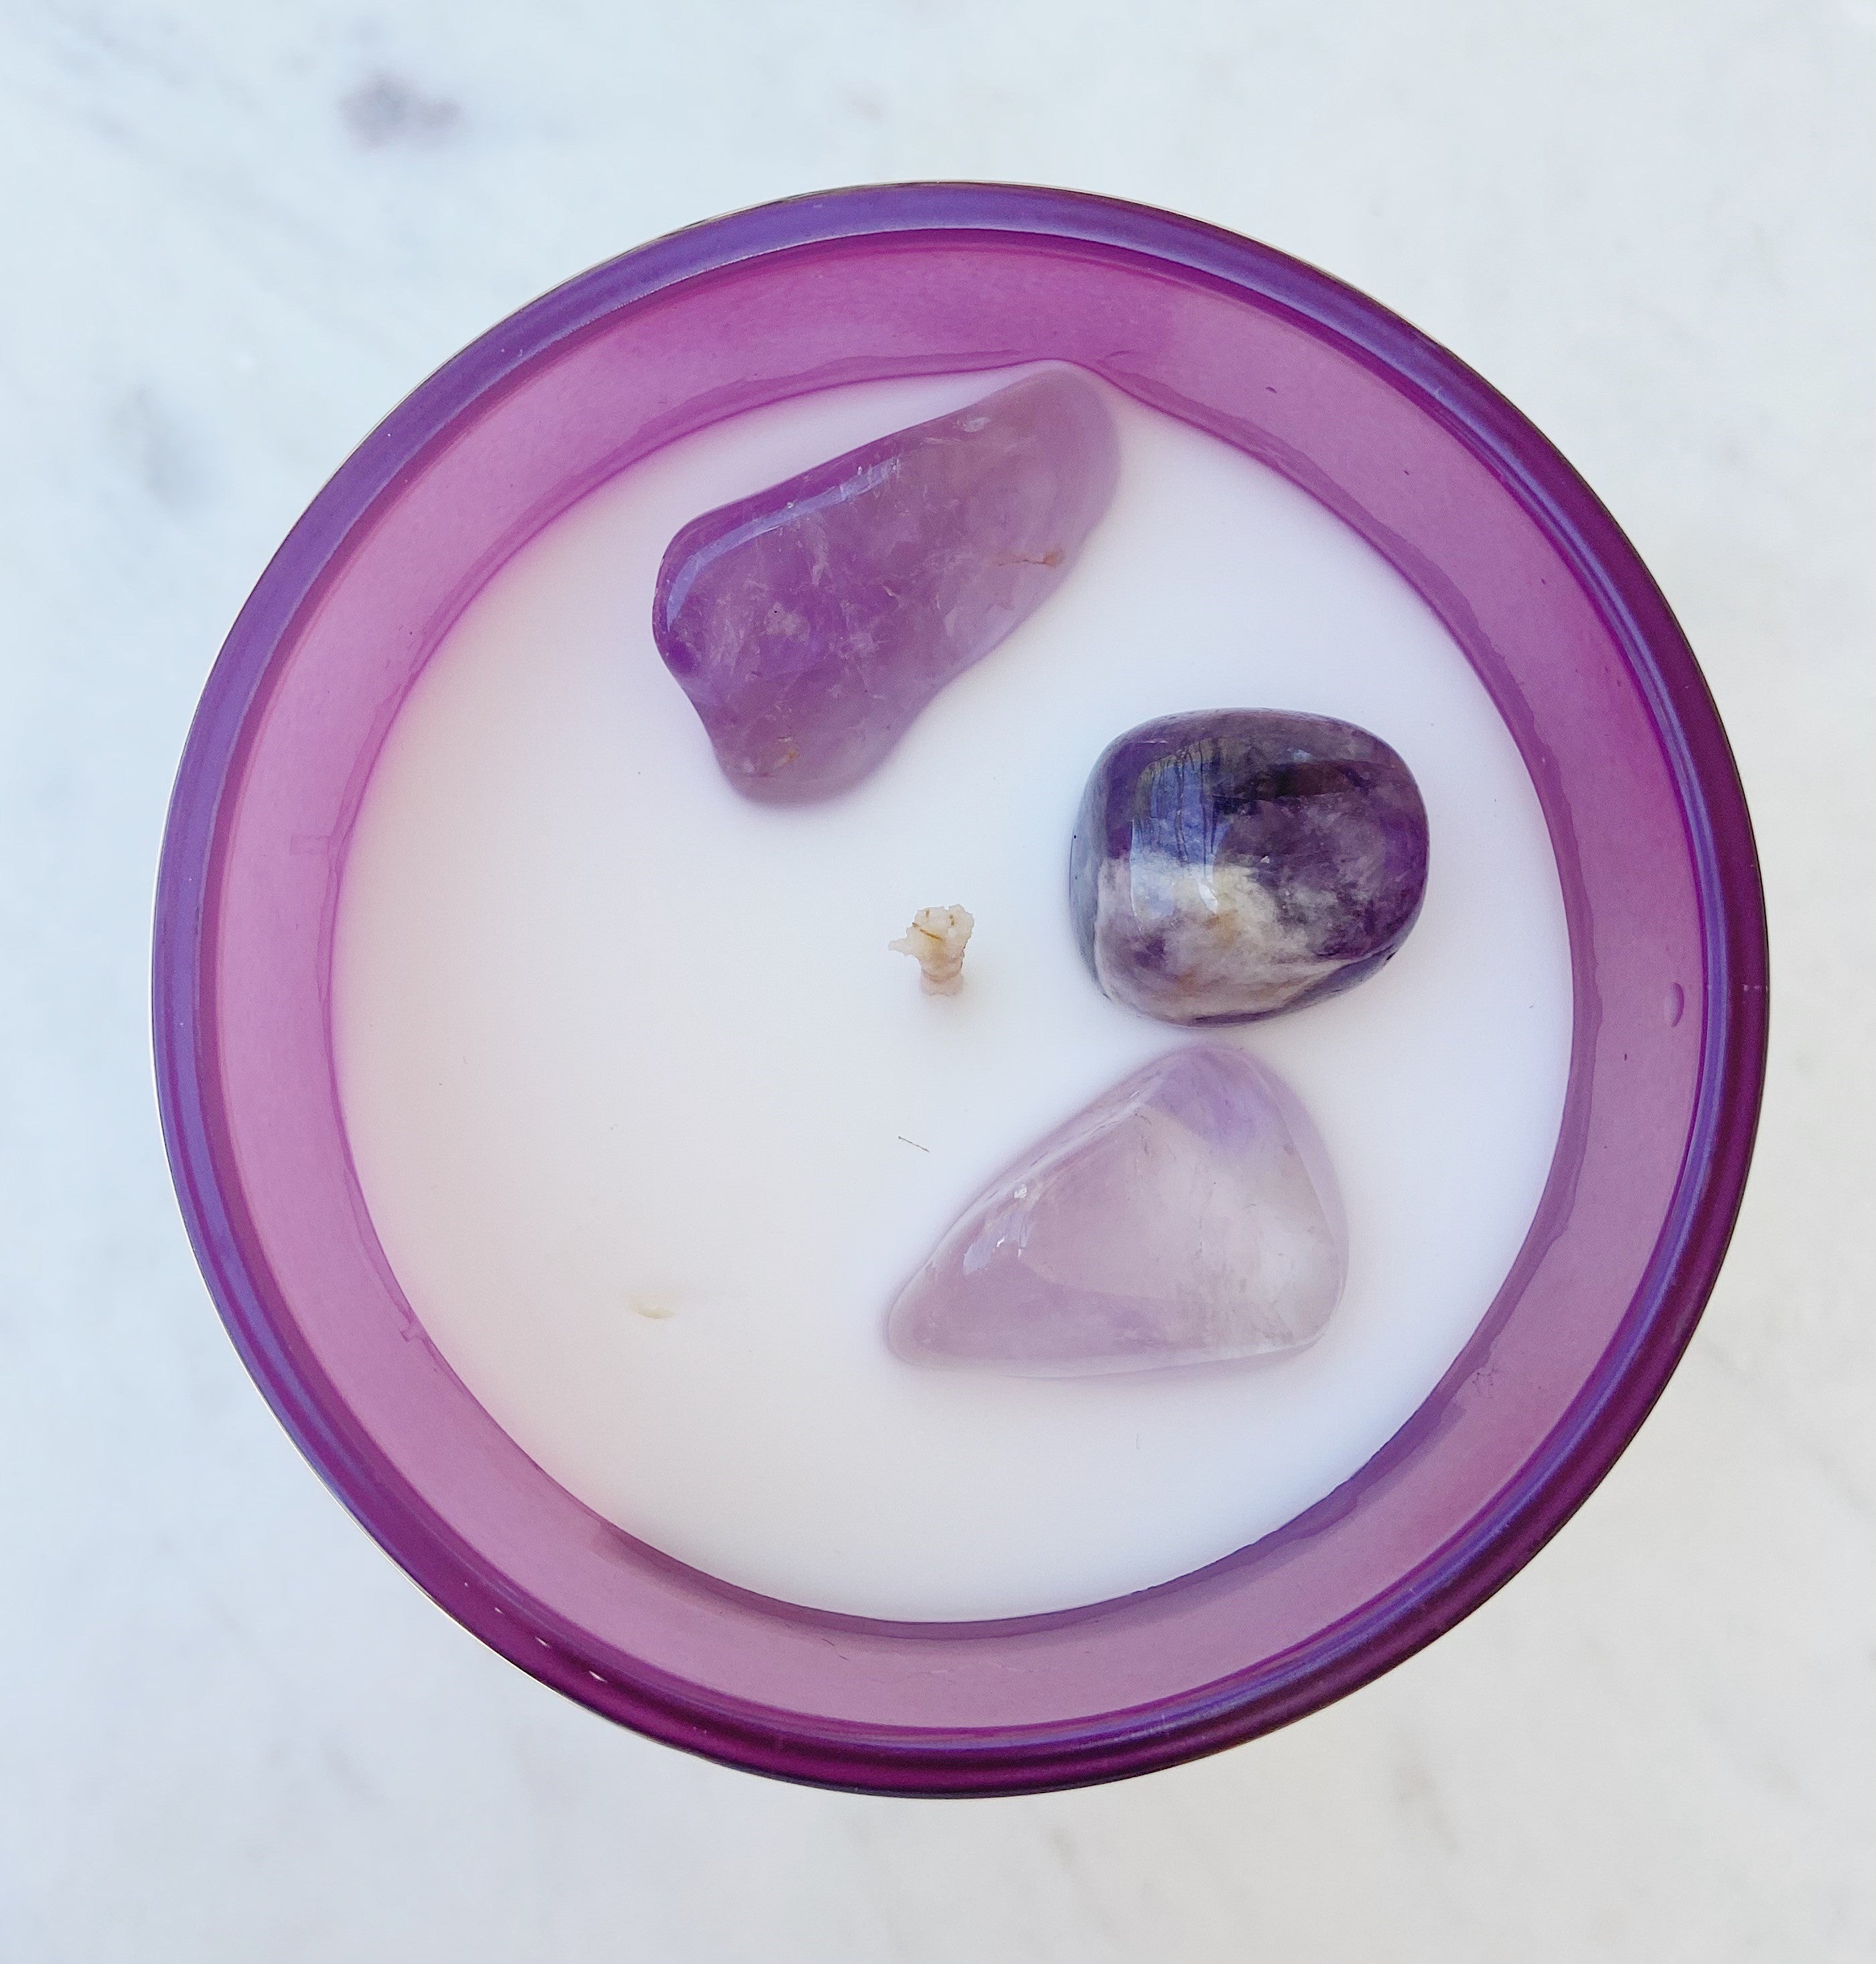 Crystal Intention Candle - Amethyst